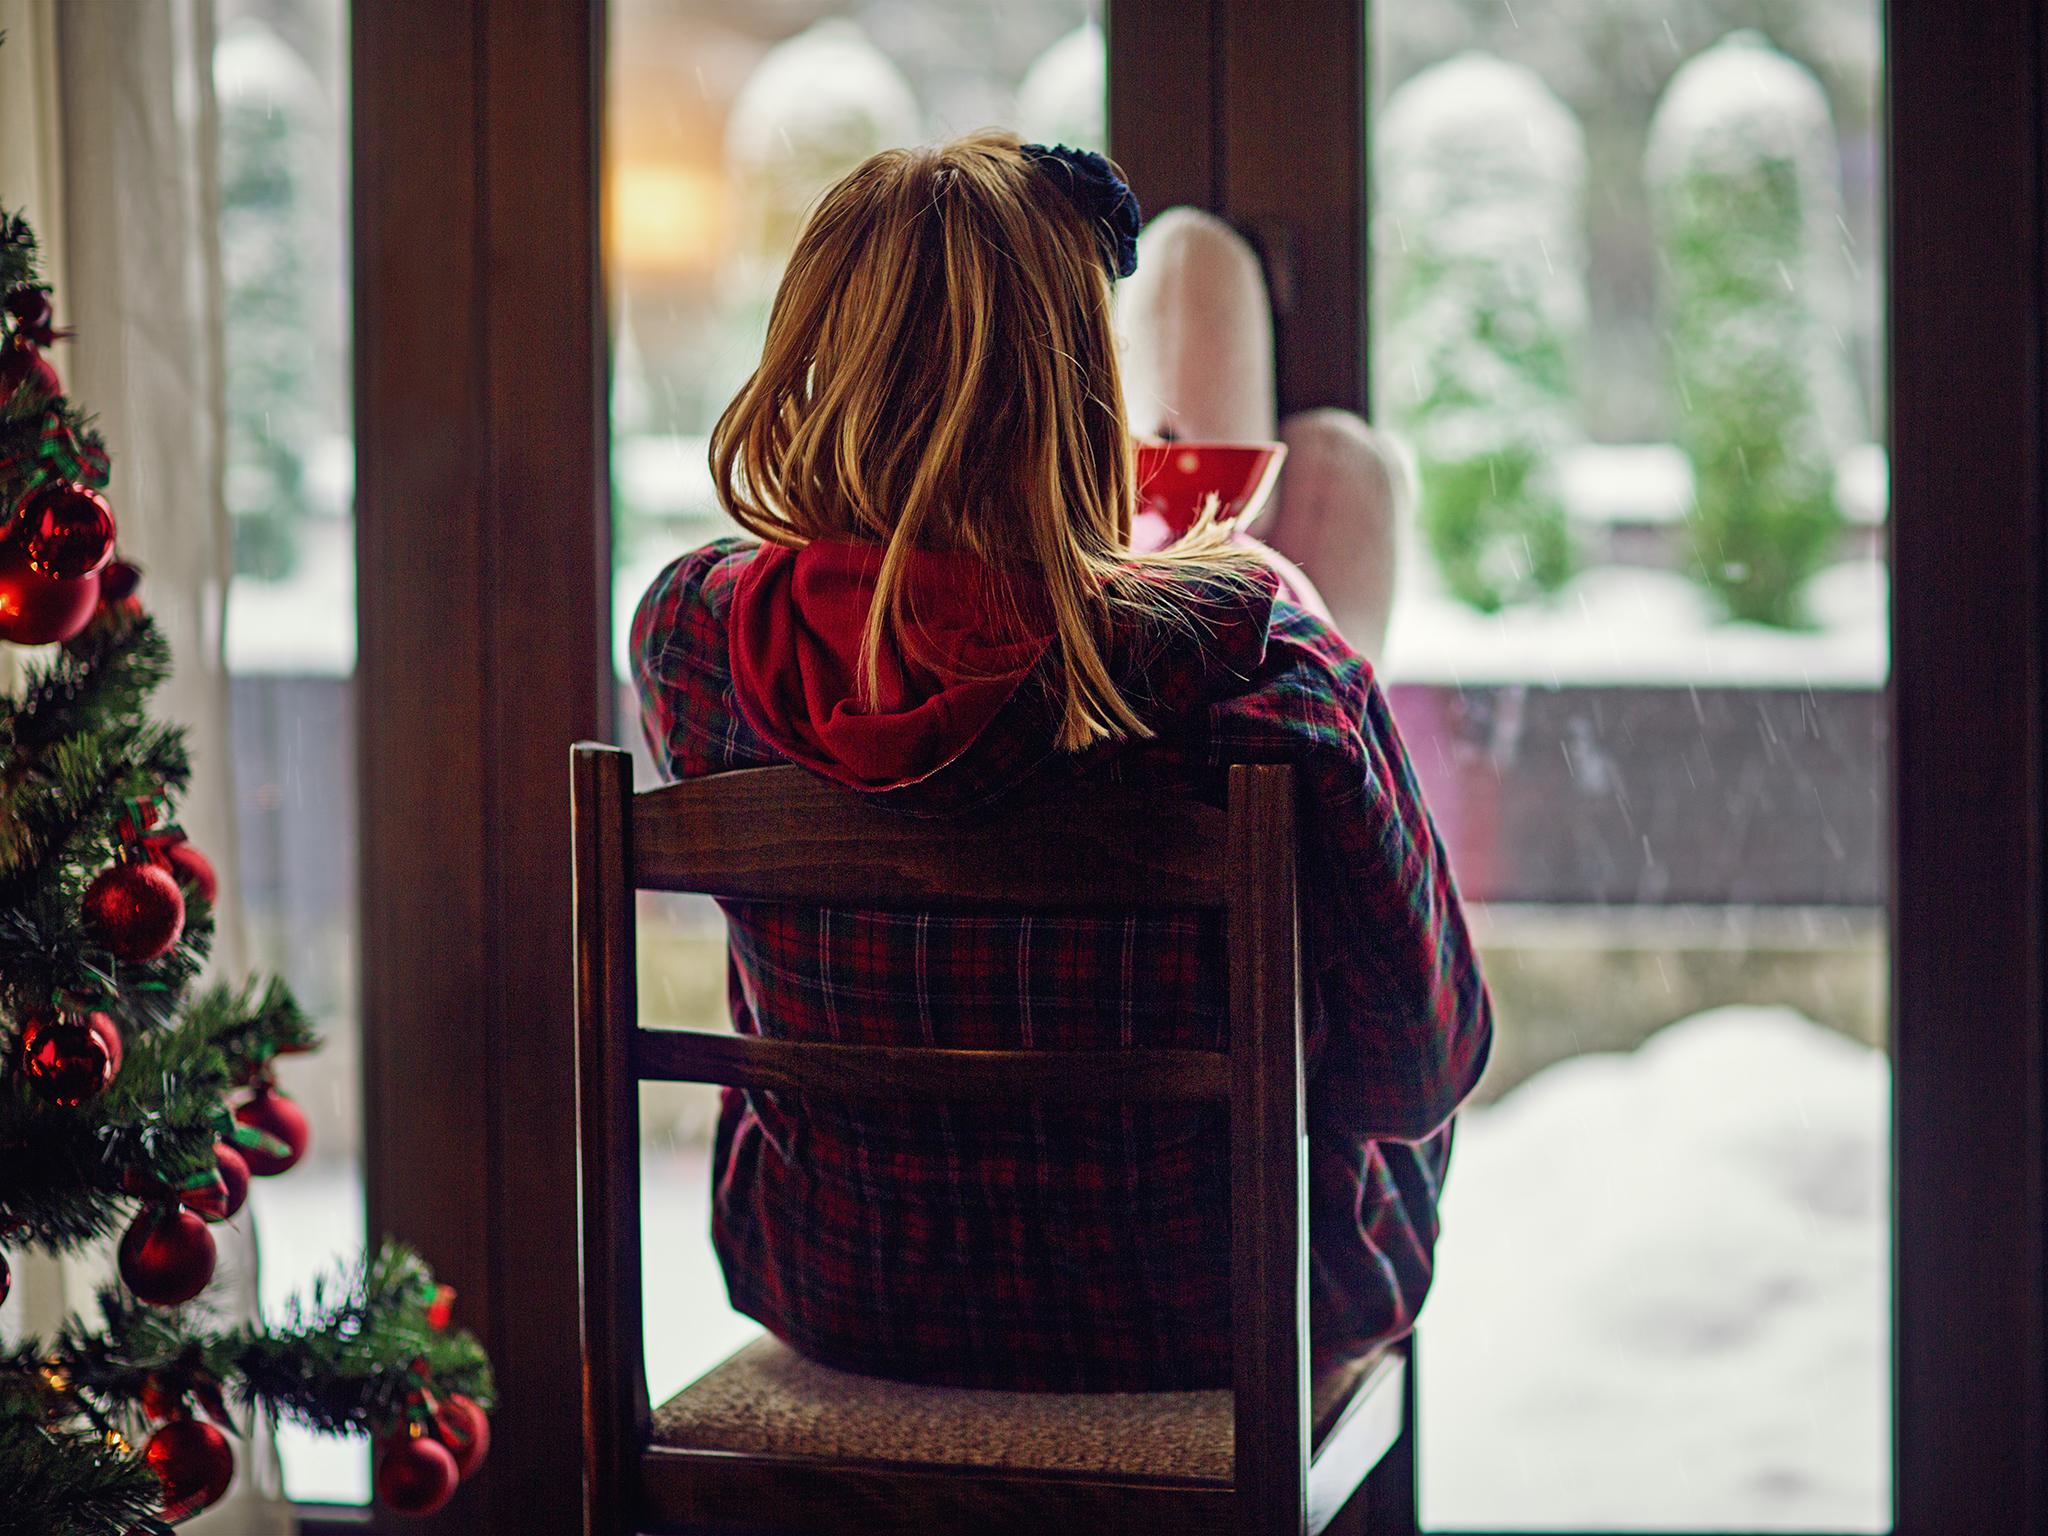 Mental Health At Christmas Millennials Are More Lonely Than Older